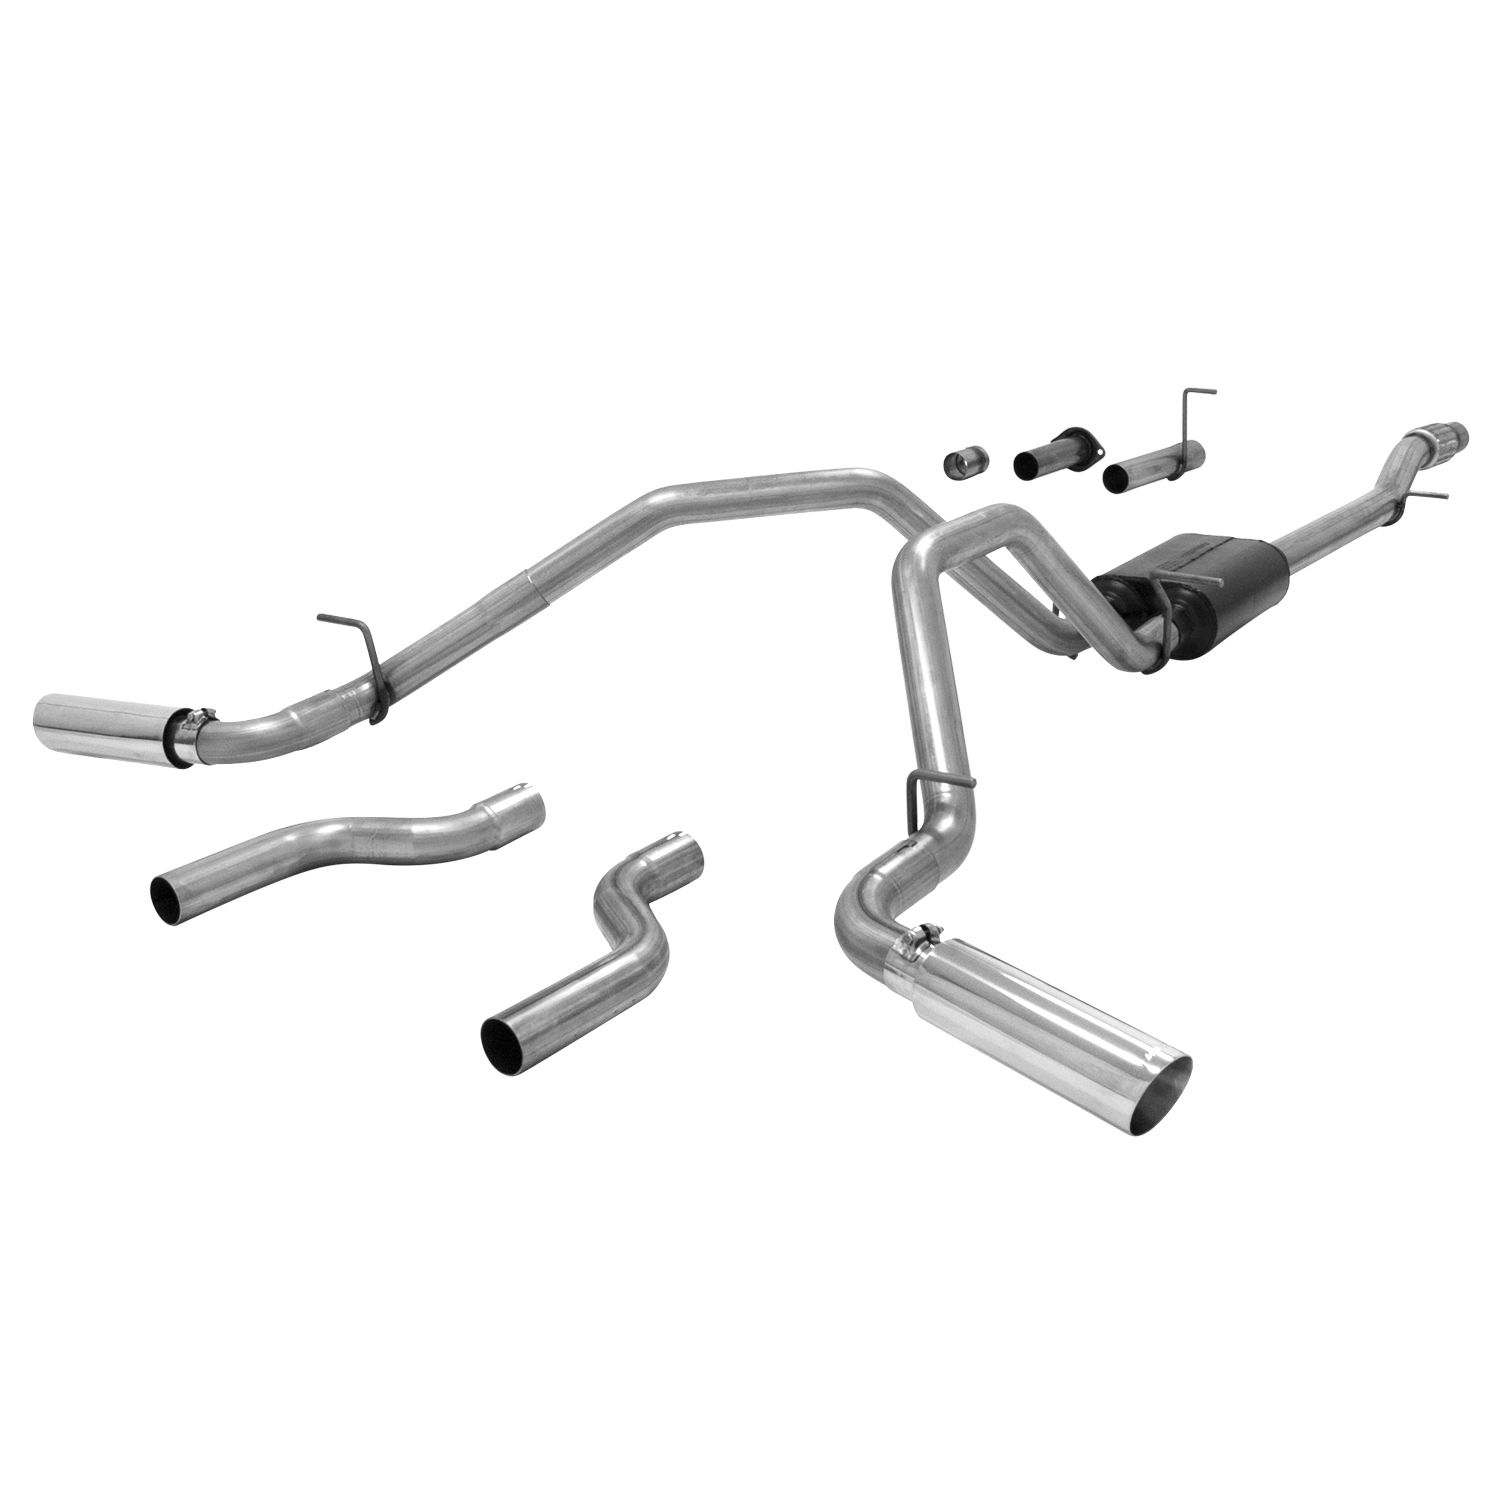 2007-2013 GMC Sierra 1500 5.3L 4DR Crew Cab/EXT Cab Flowmaster American Thunder Cat-Back Exhaust - 817680